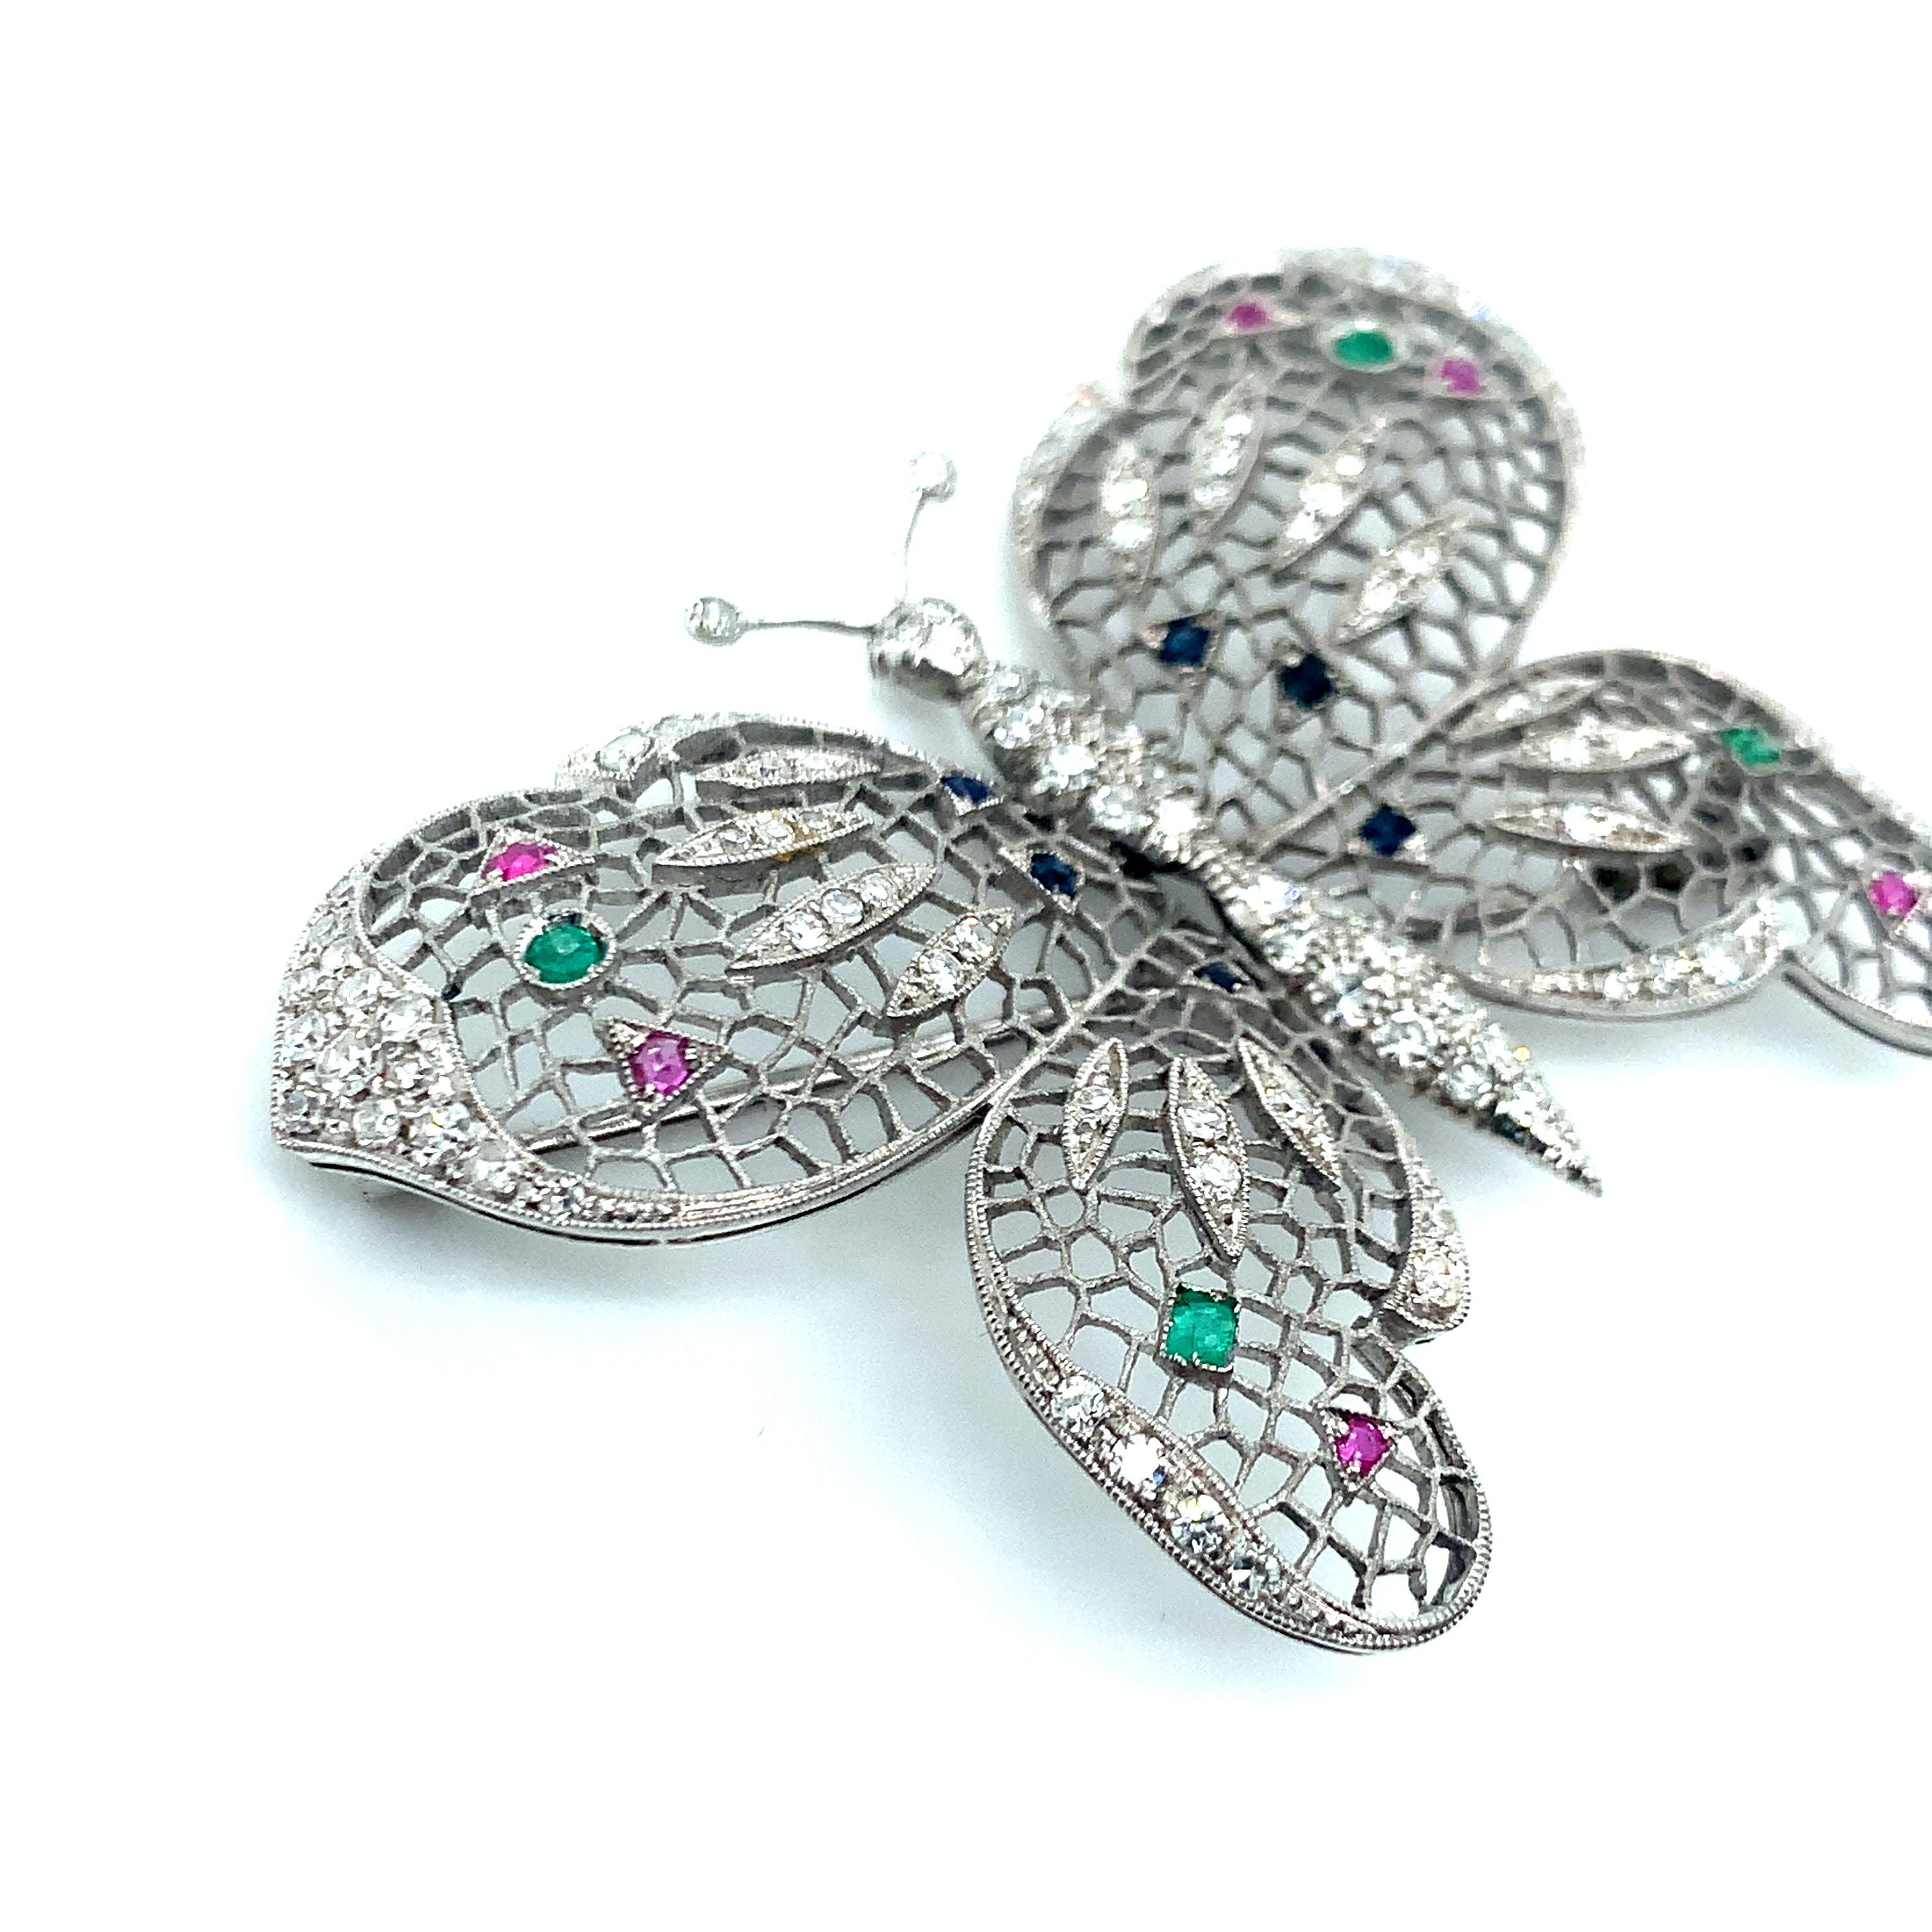 Multigem Butterfly Diamond Brooch In Excellent Condition For Sale In New York, NY